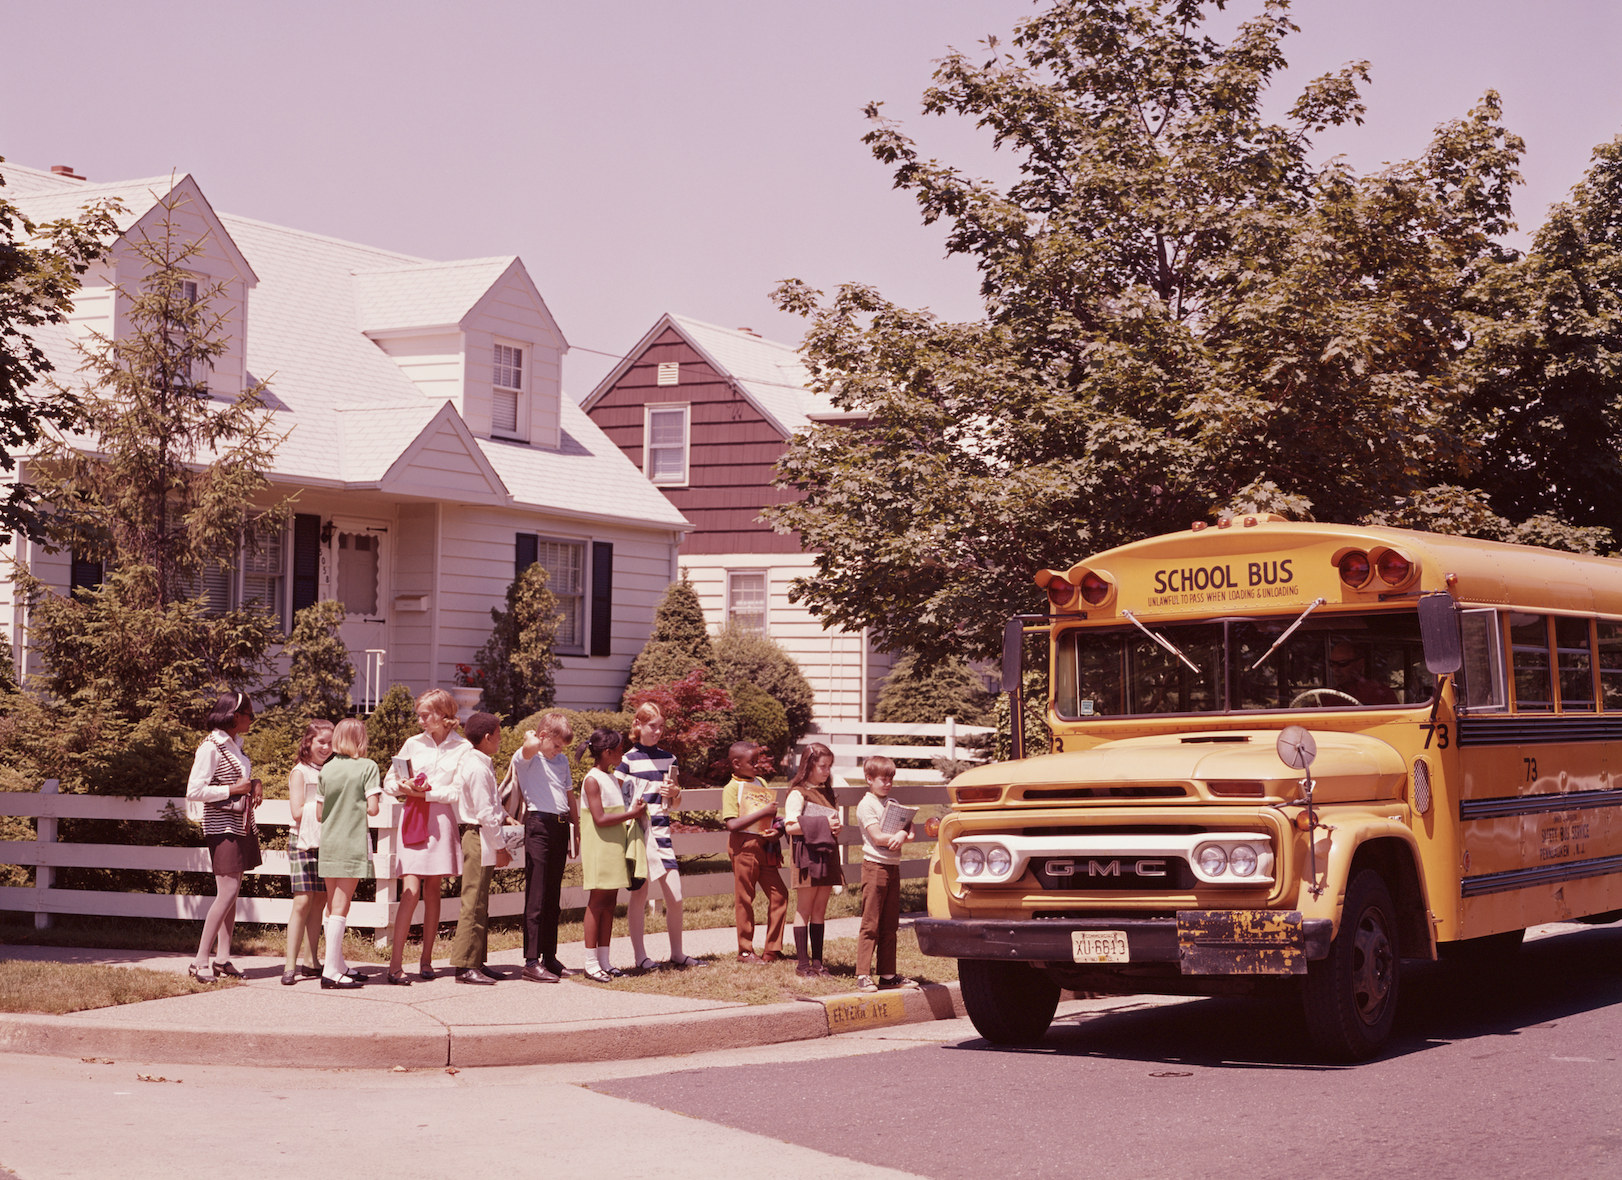 Children in a line waiting to board a school bus, daytime in a suburban setting